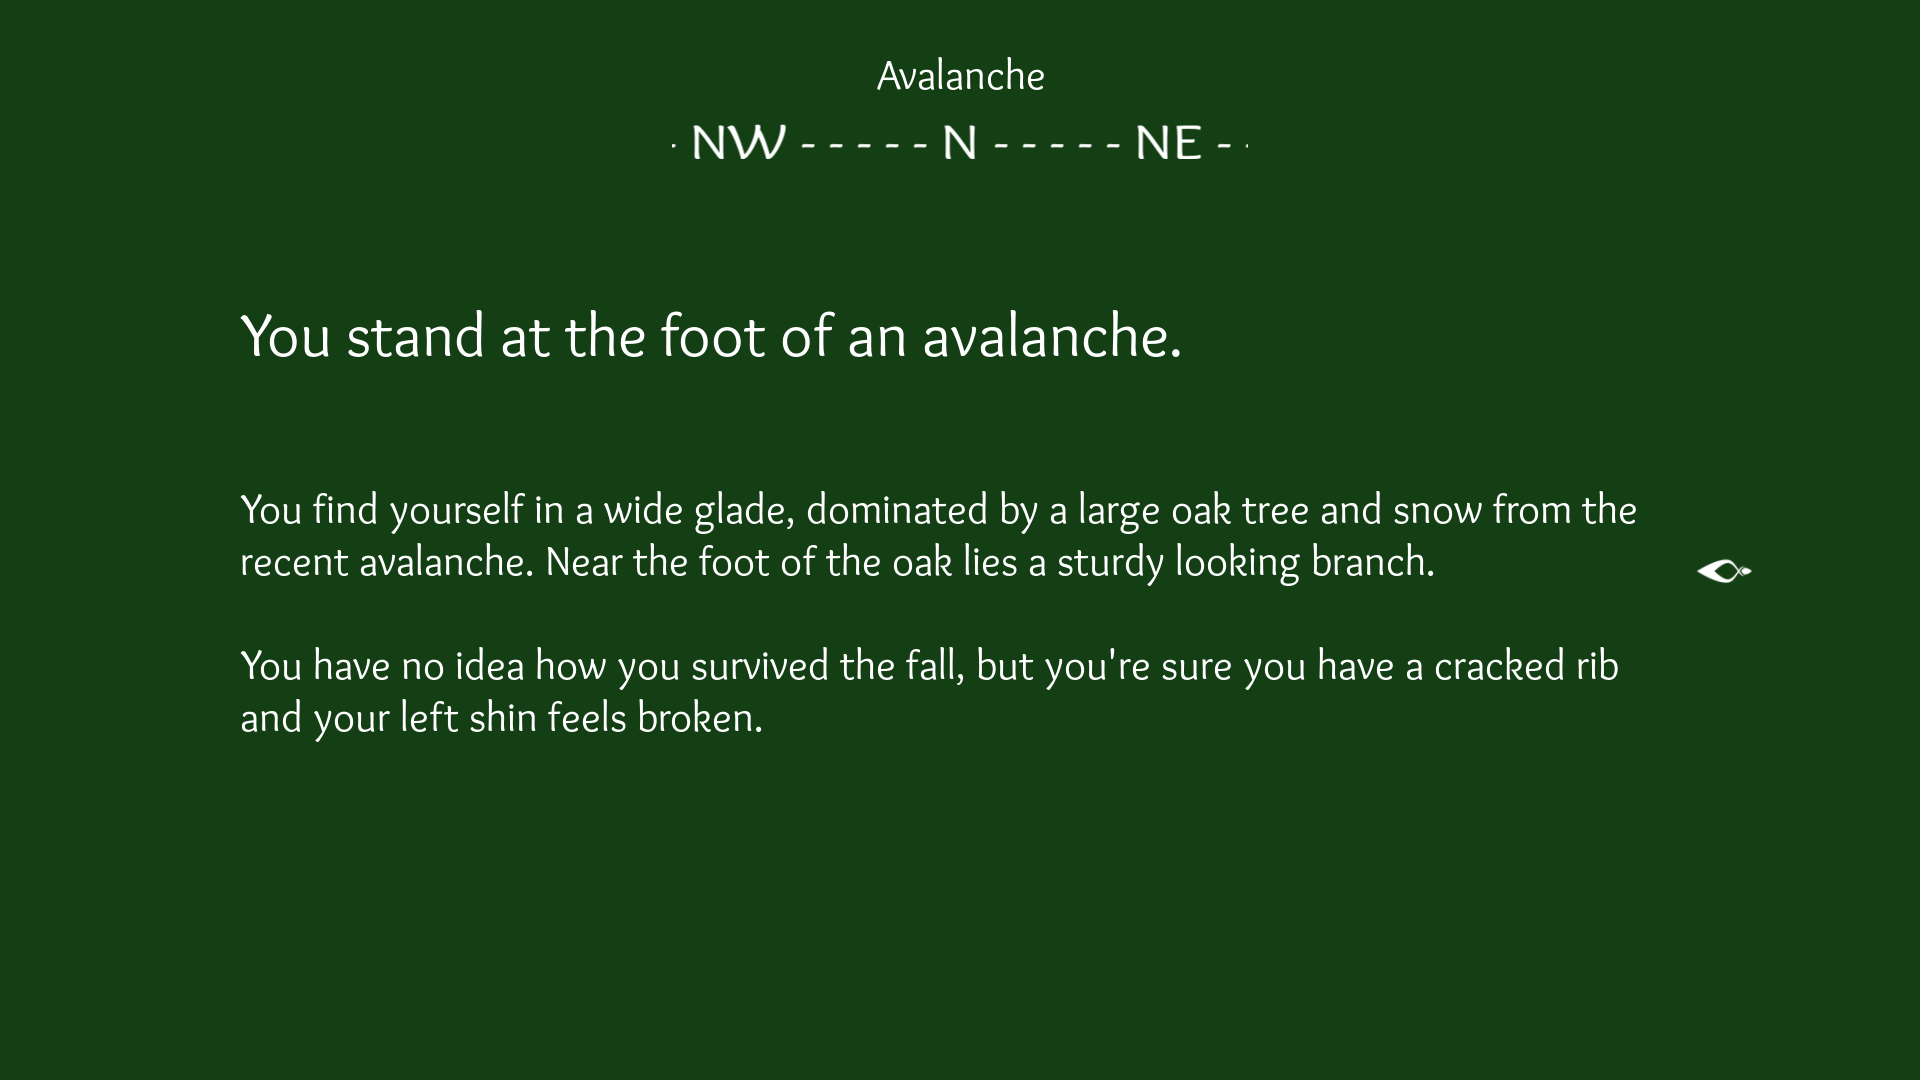 demo_avalanche.png